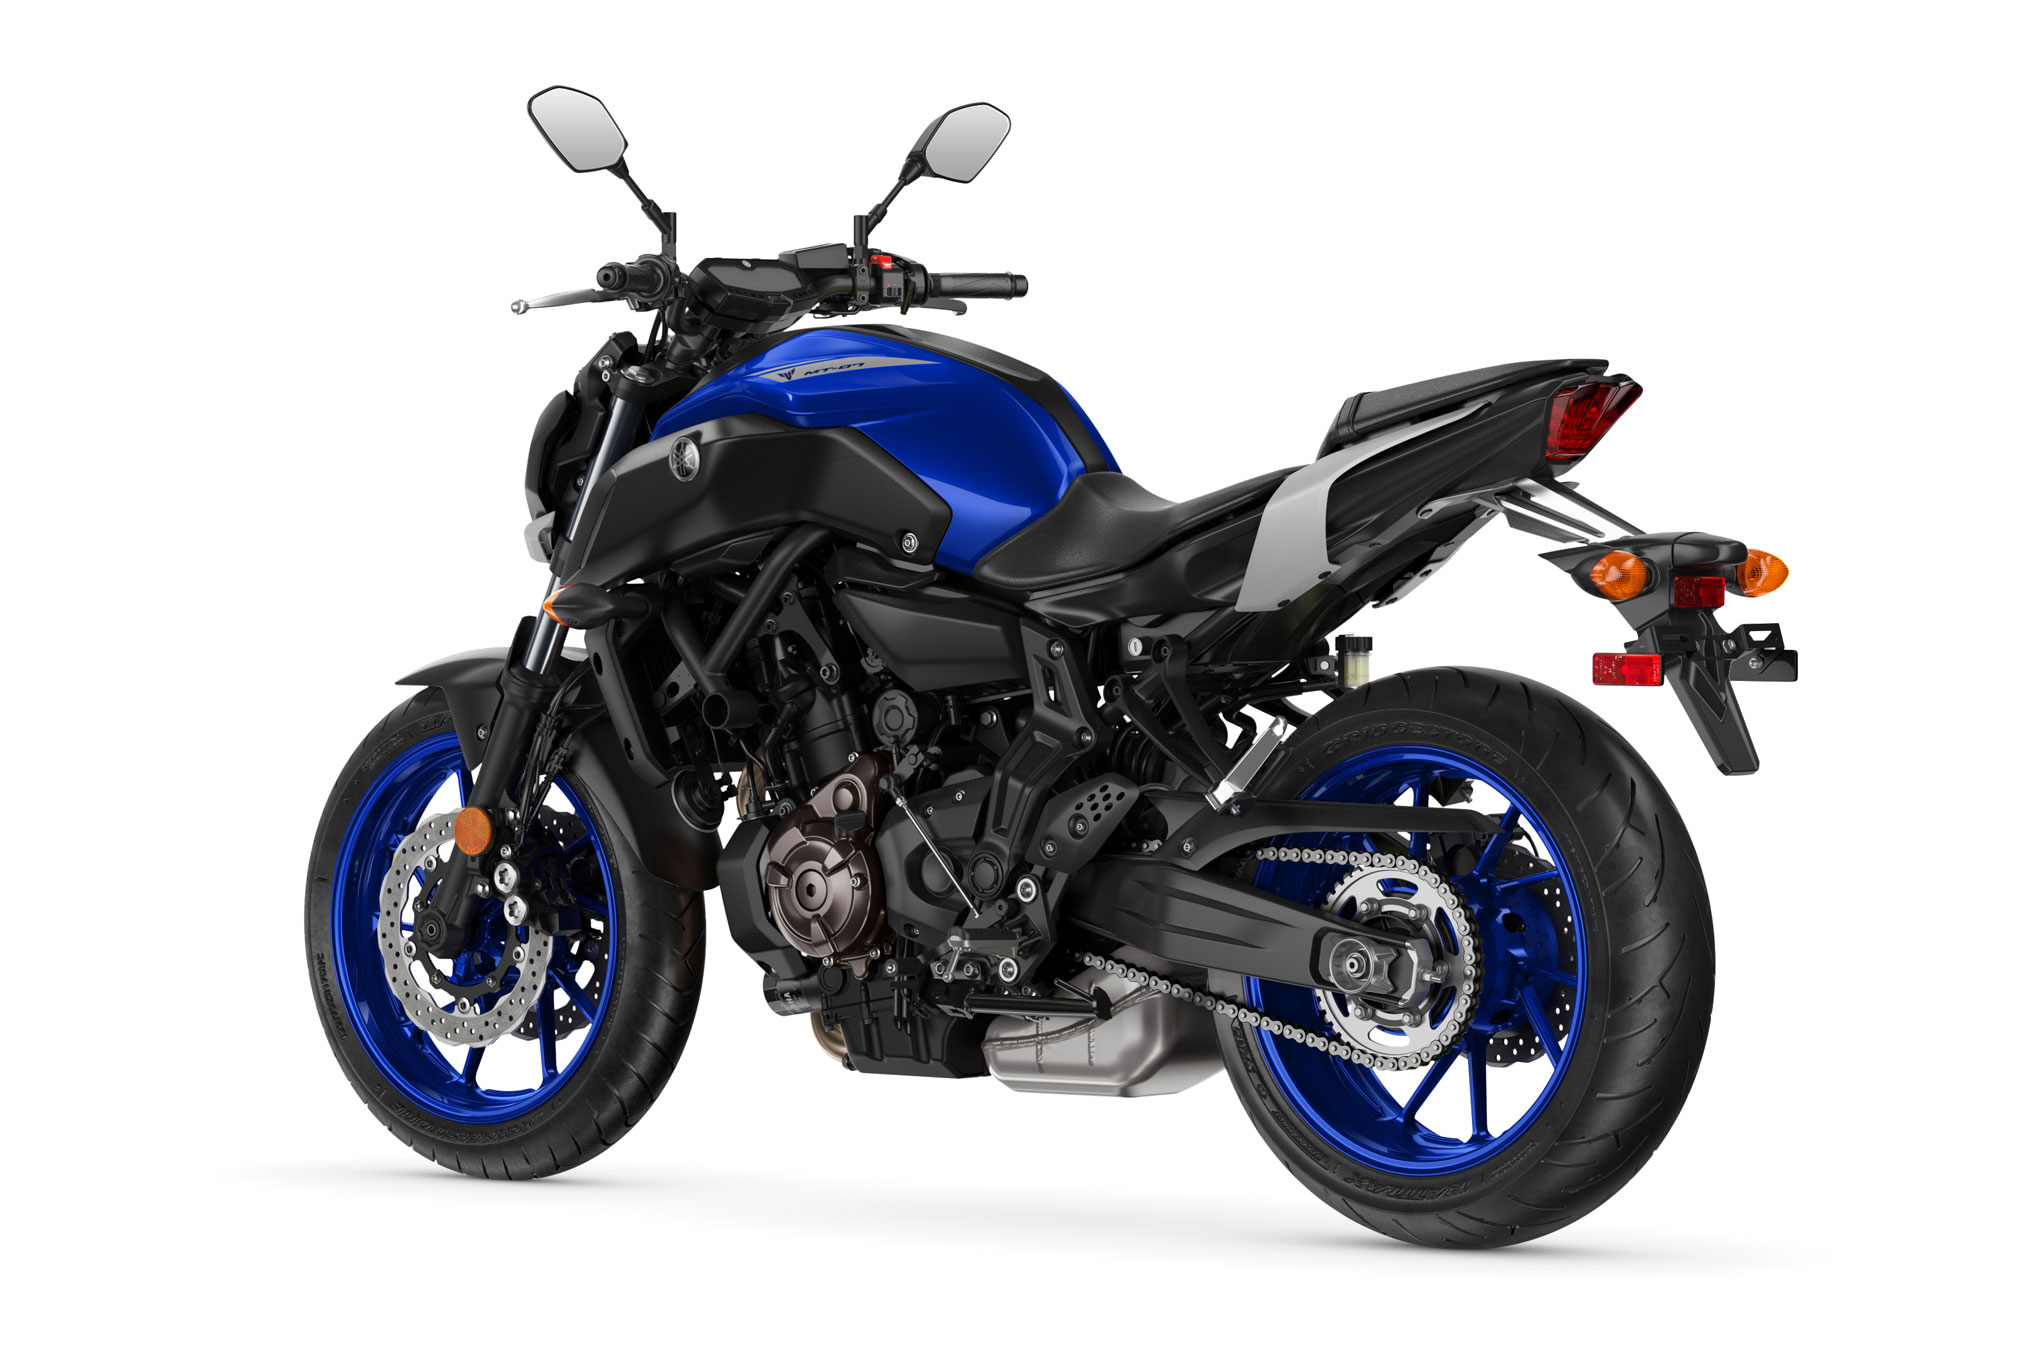 2020 Yamaha MT-07 Guide • Total Motorcycle